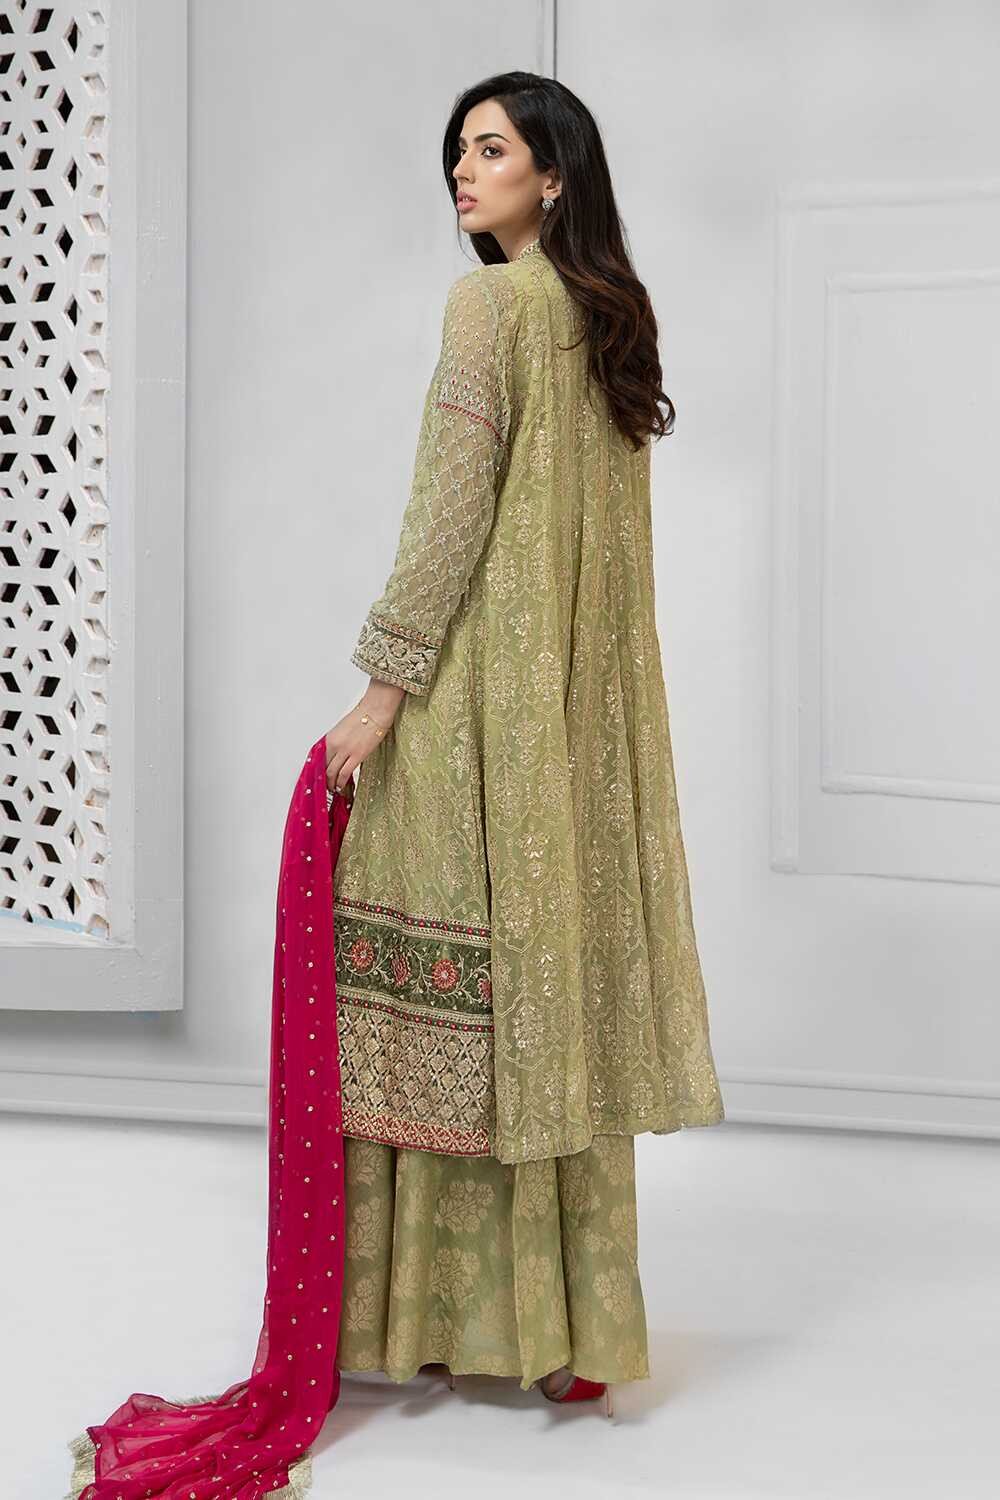 /2019/07/mariab-eid-collection-suit-green-sf-1690-image2.jpeg